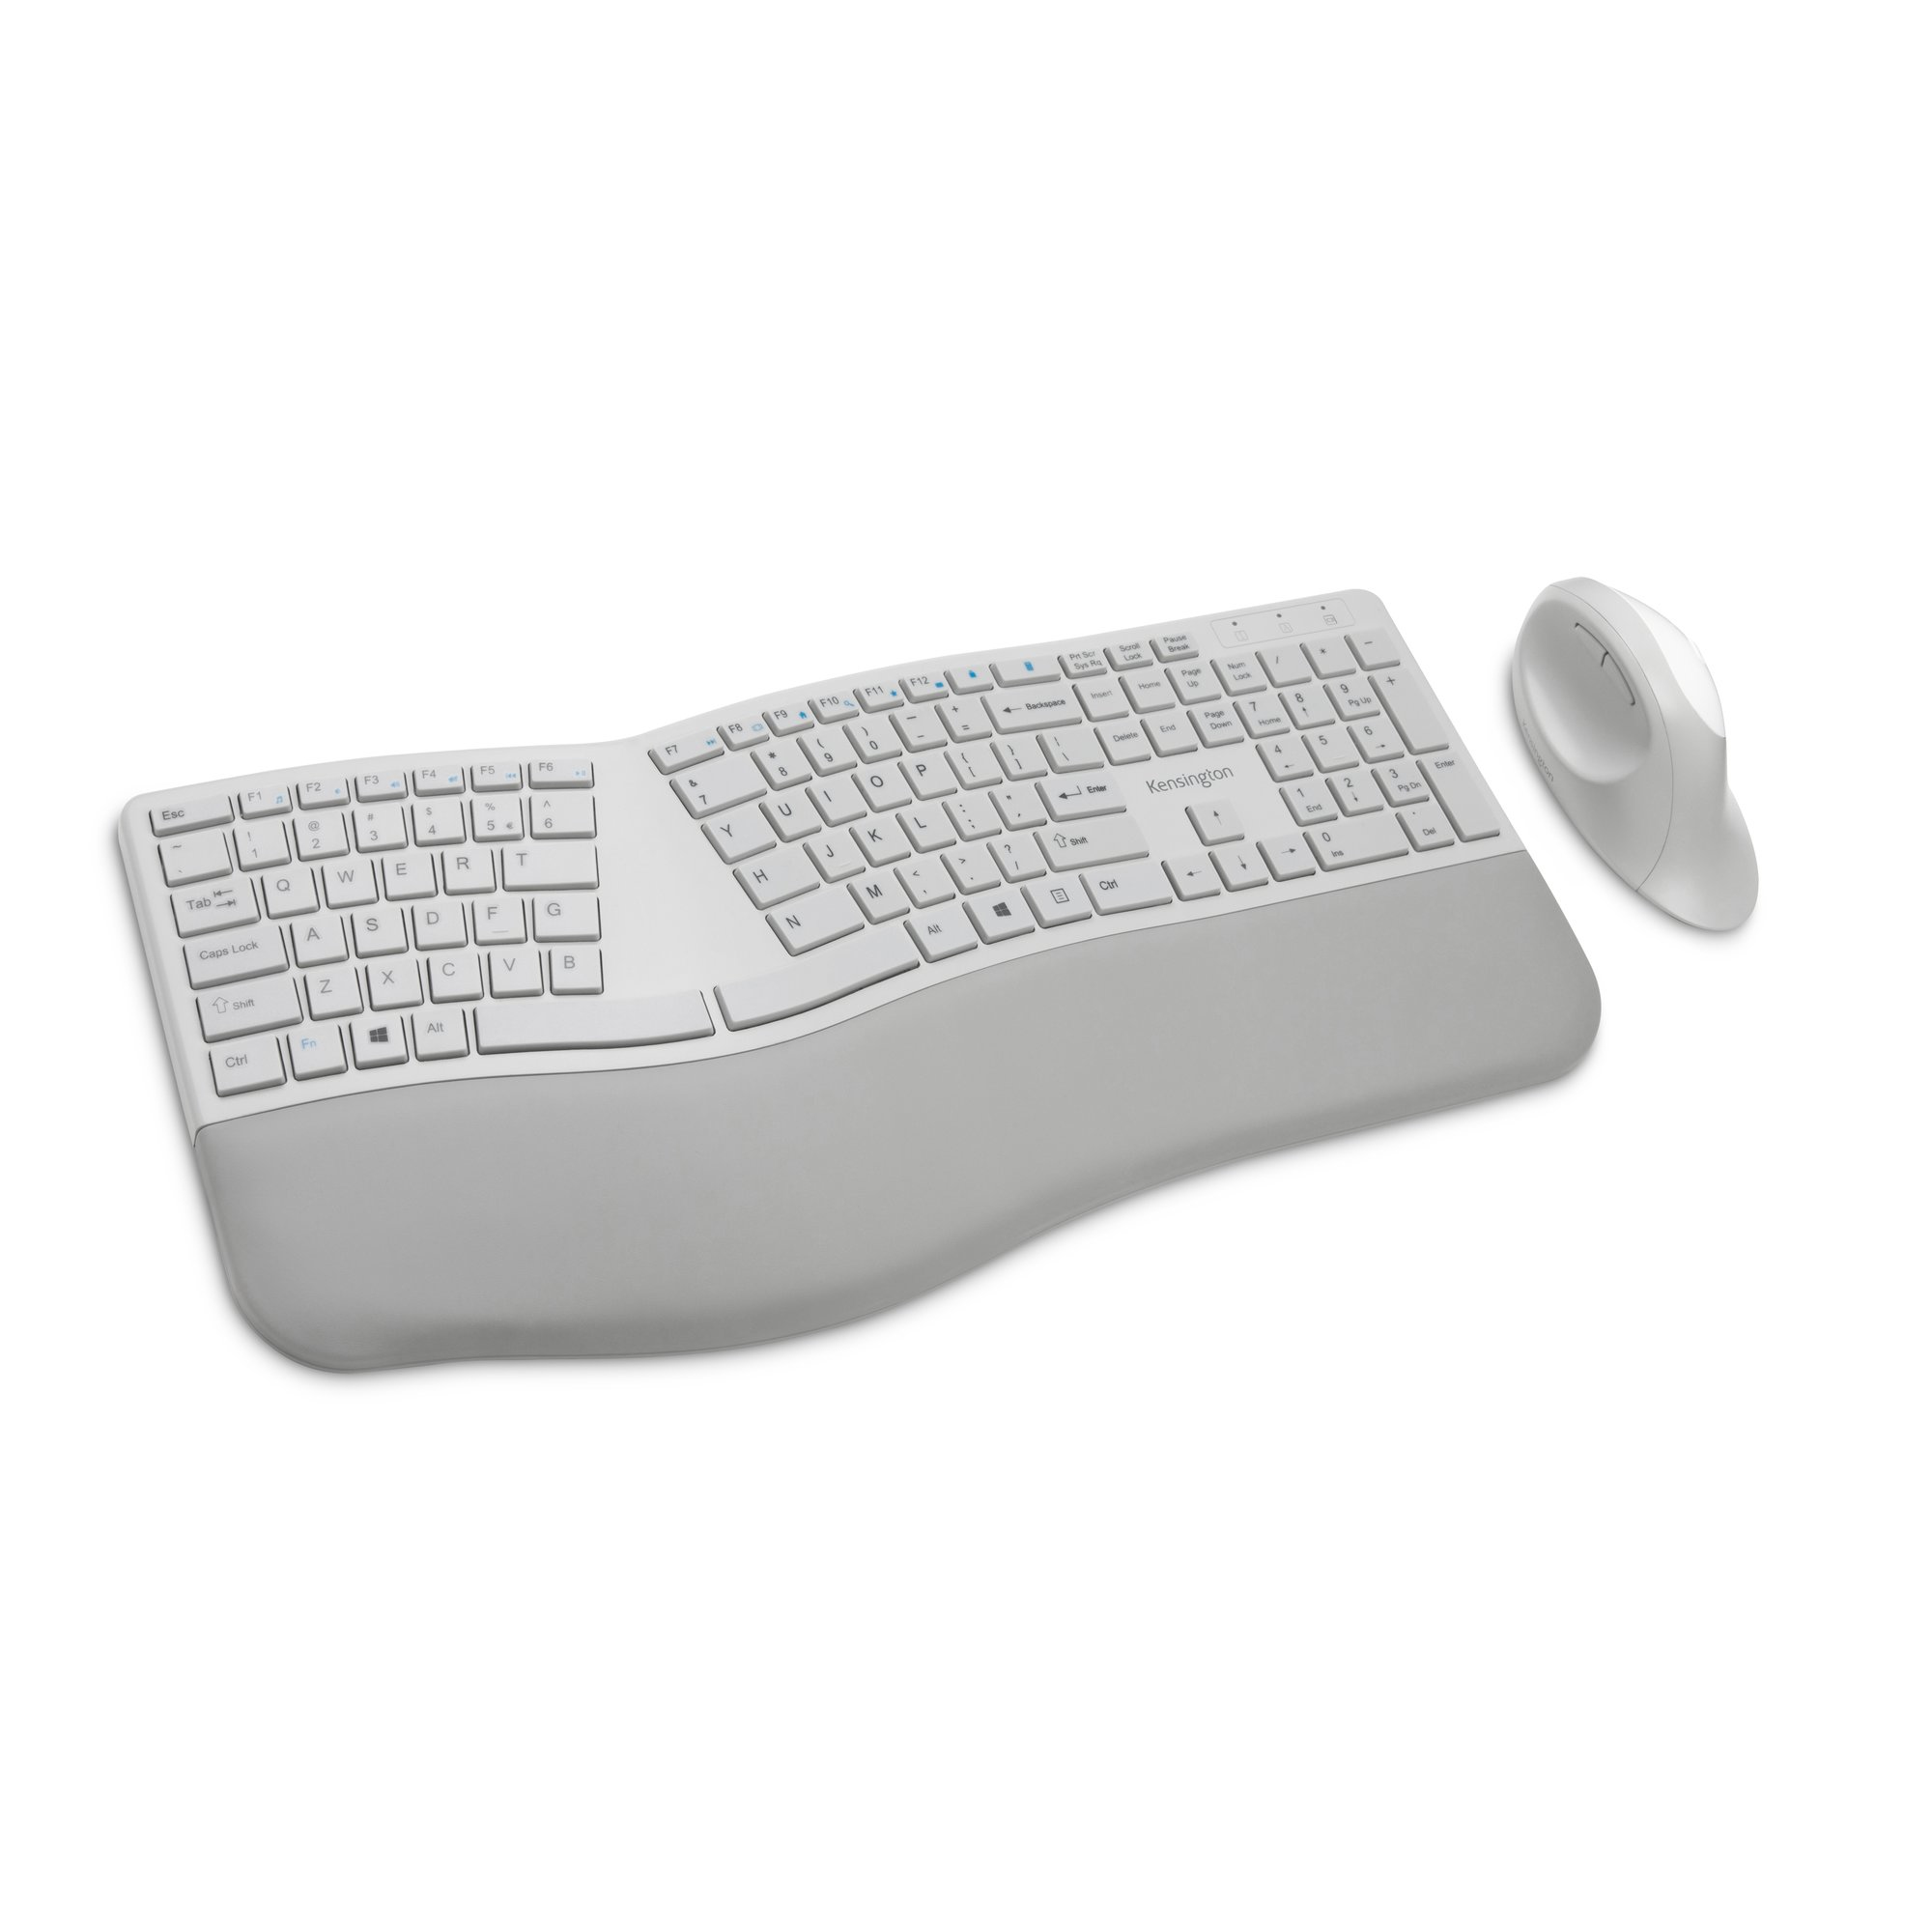 K75407US KENSINGTON PRO FIT  ERGO WIRELESS KEYBOARD AND MOUSE GRAY